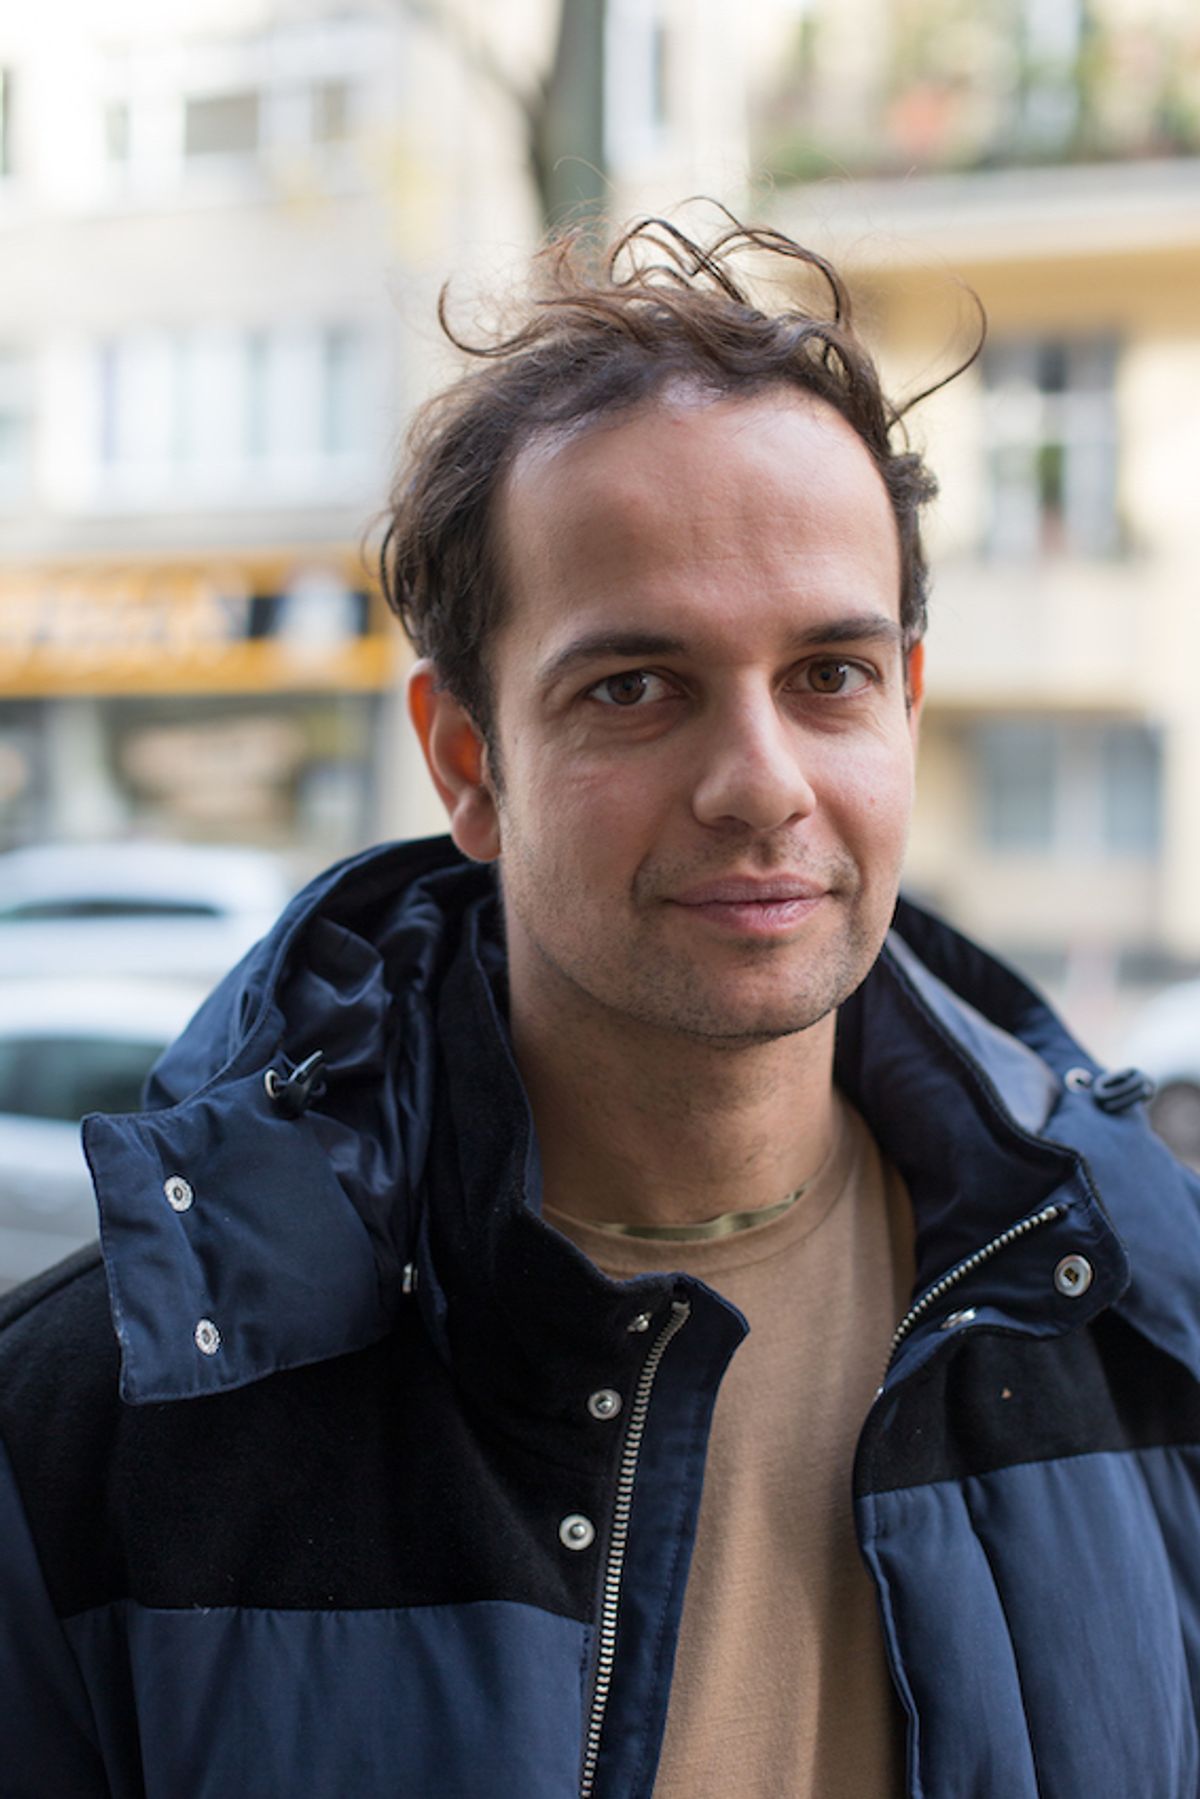 Tino Sehgal will be the eighth contemporary artist to show at Blenheim Palace Photo: Wolfgang Tillmans